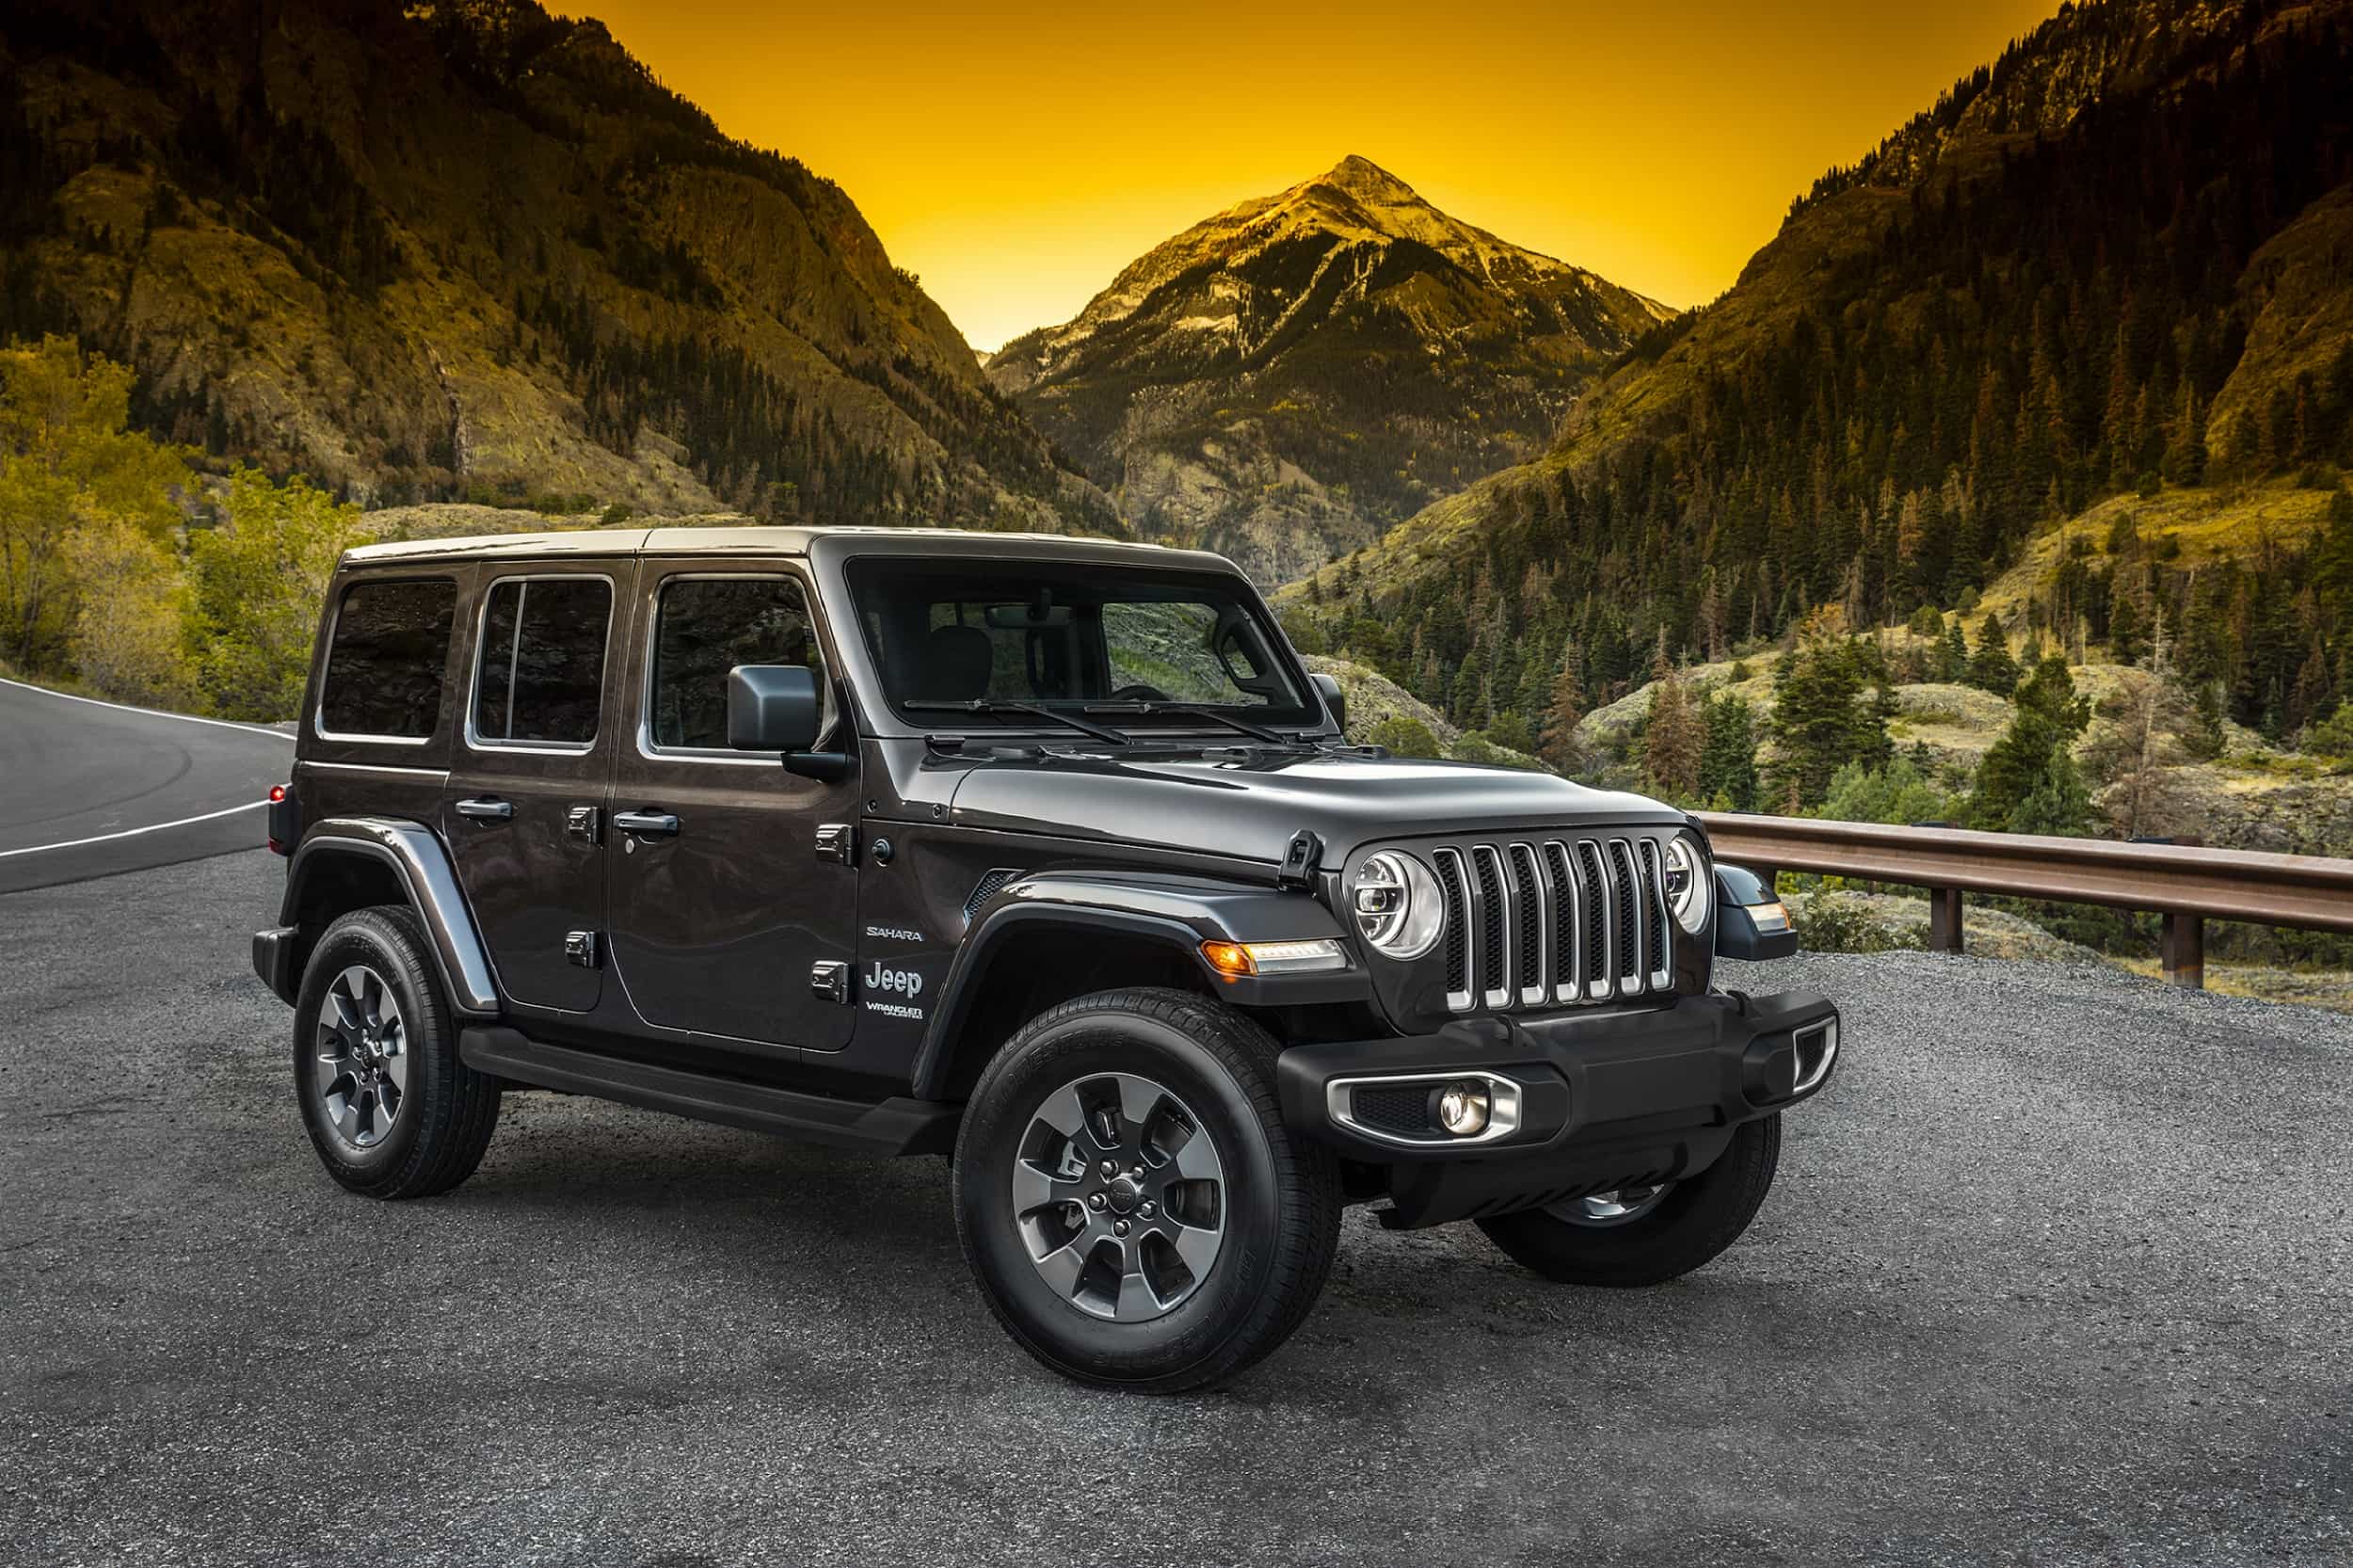 New 2018 Jeep Wrangler unveiled in Los Angeles | Zee Business